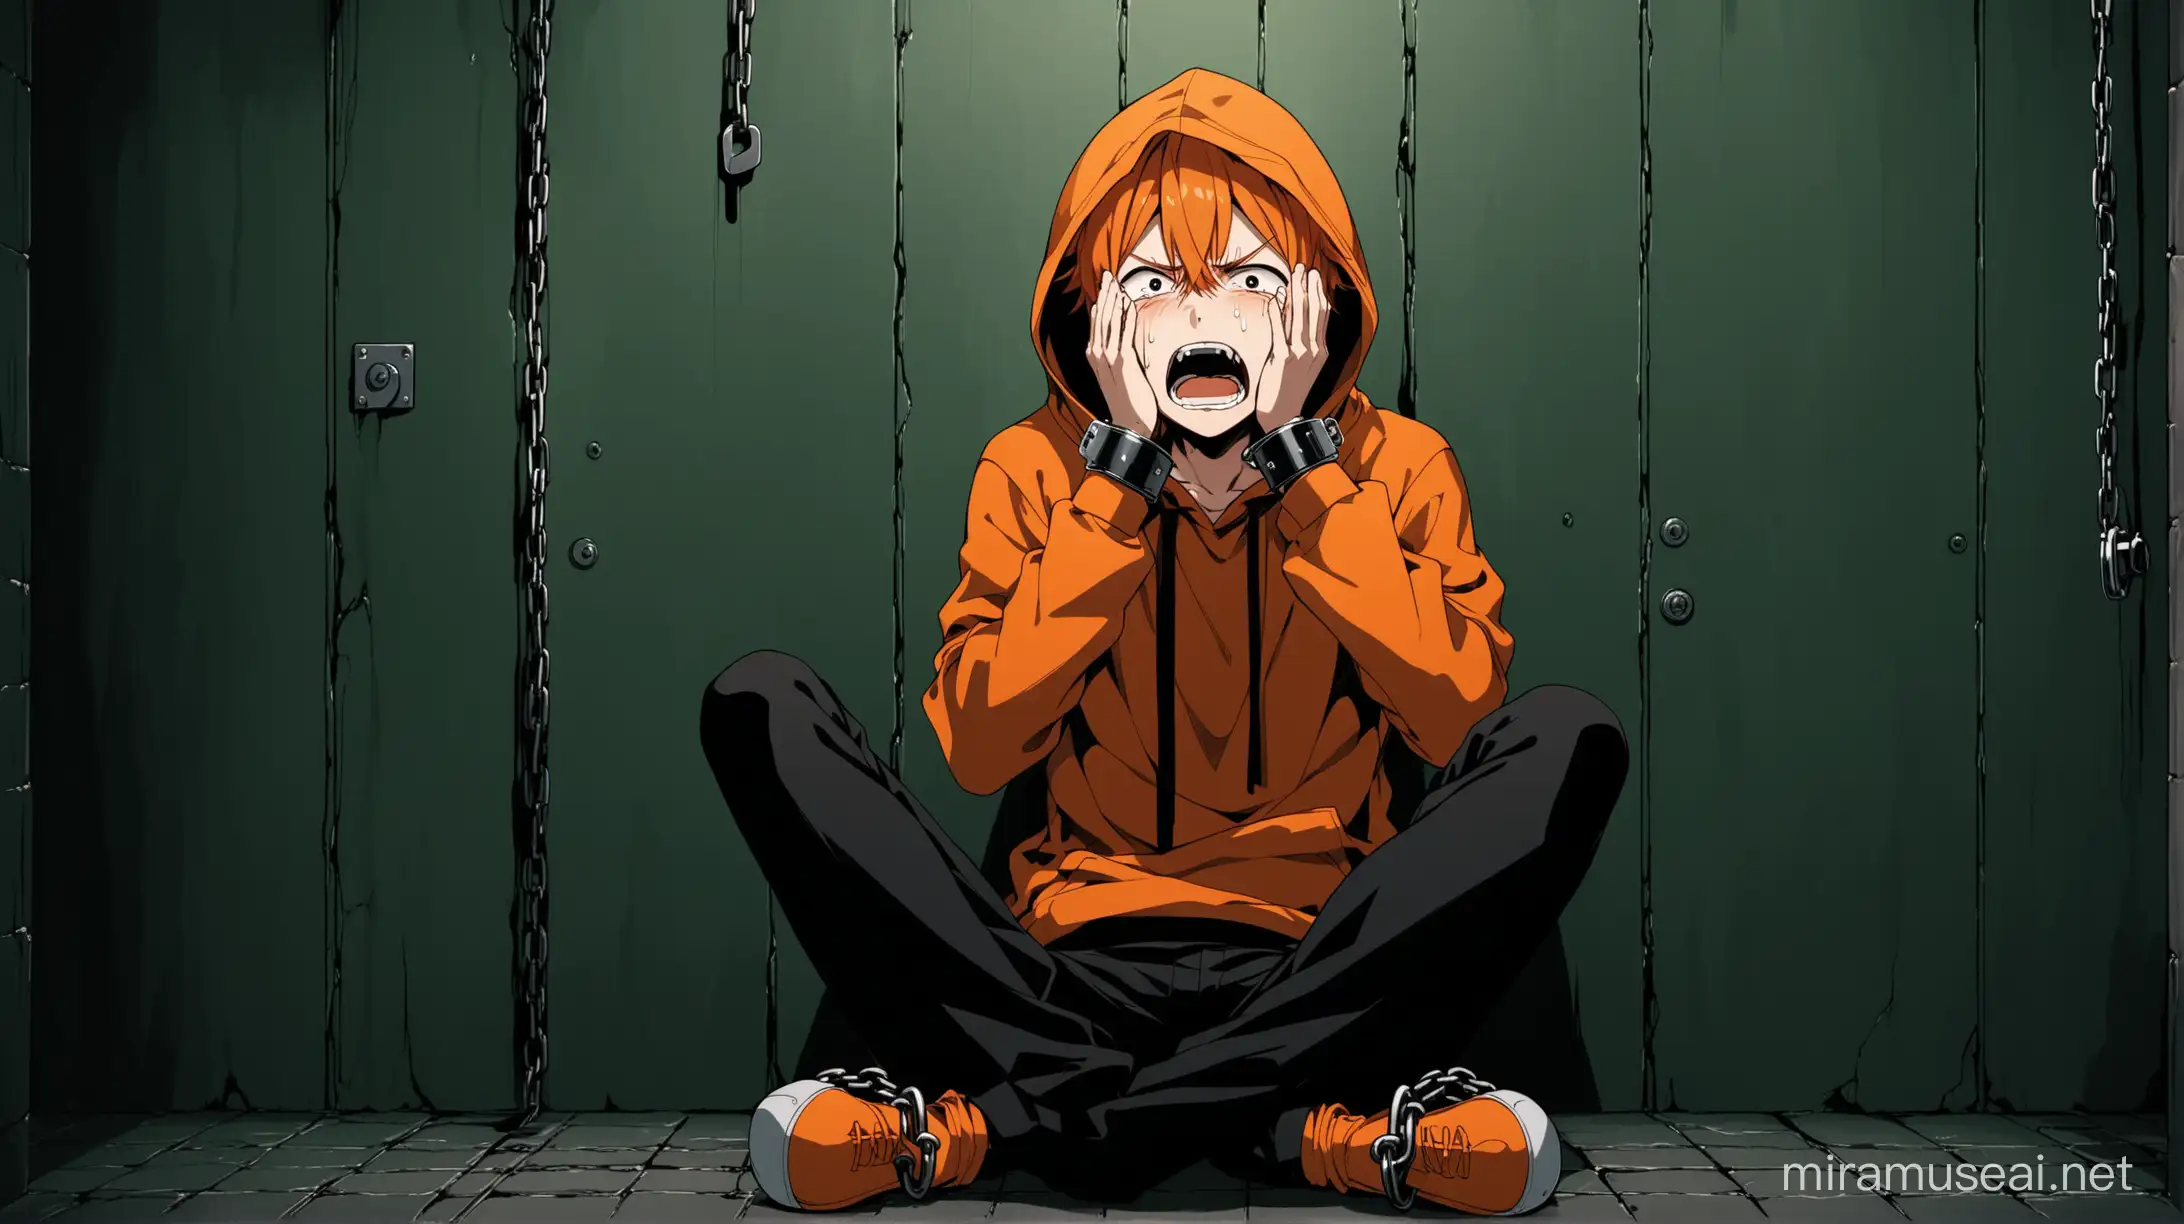 Anime Boy Character Crying and Screaming with Hands Tied in Underground Secret Room